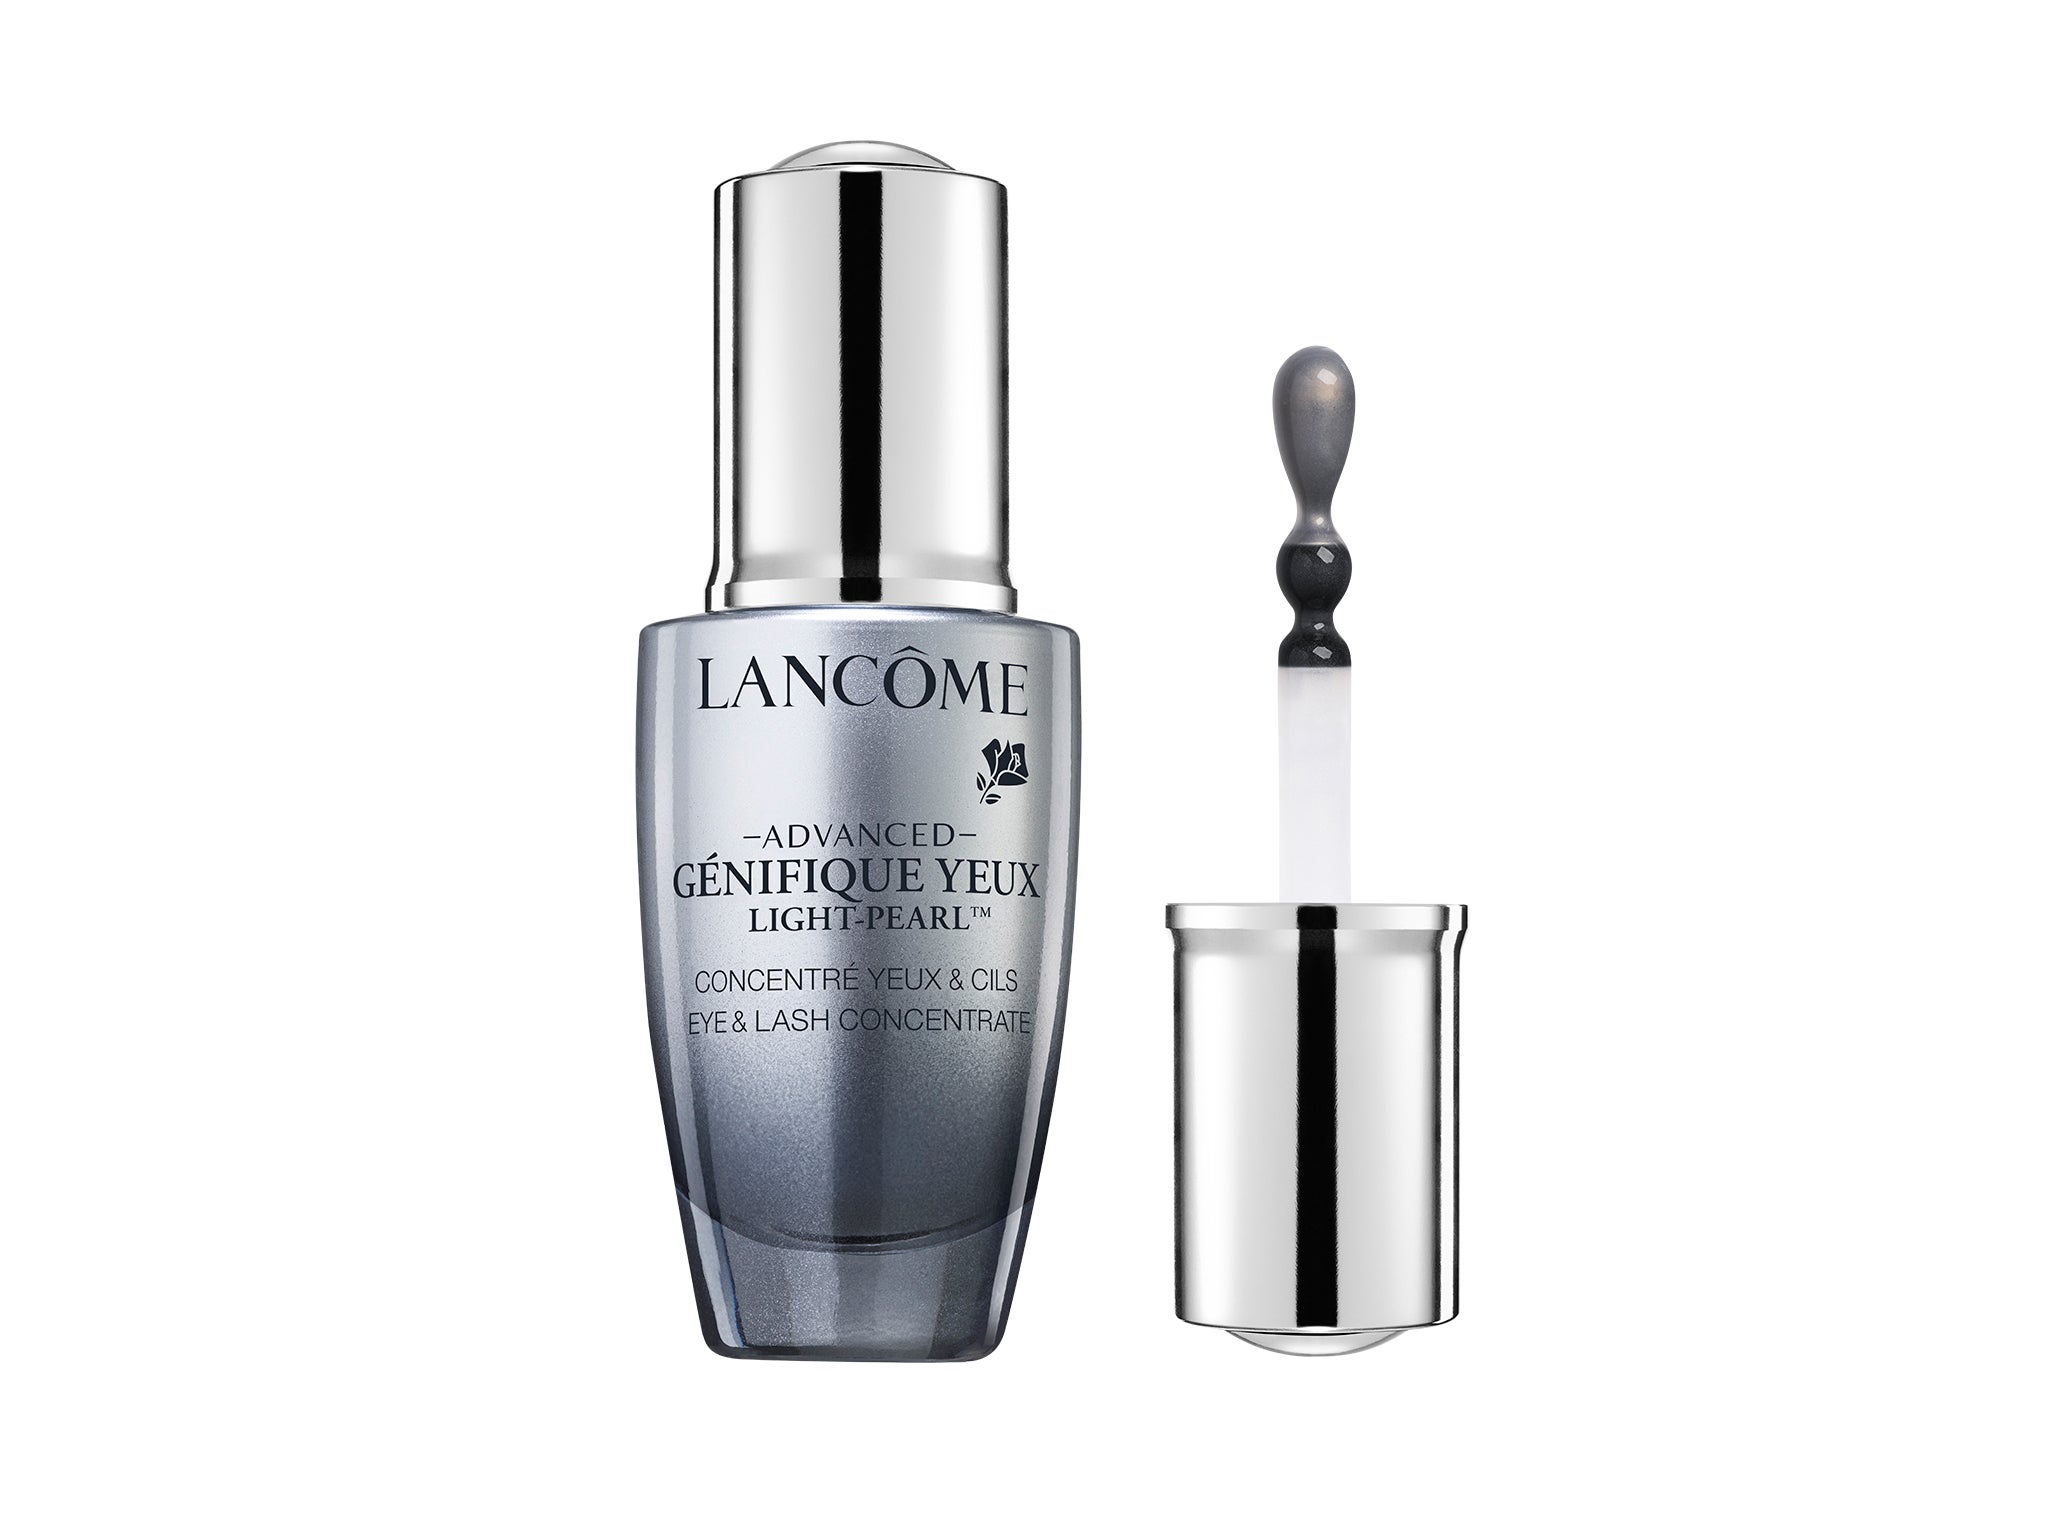 Lancome advanced genifique yeux light-pearl eye and lash concentrate.jpg